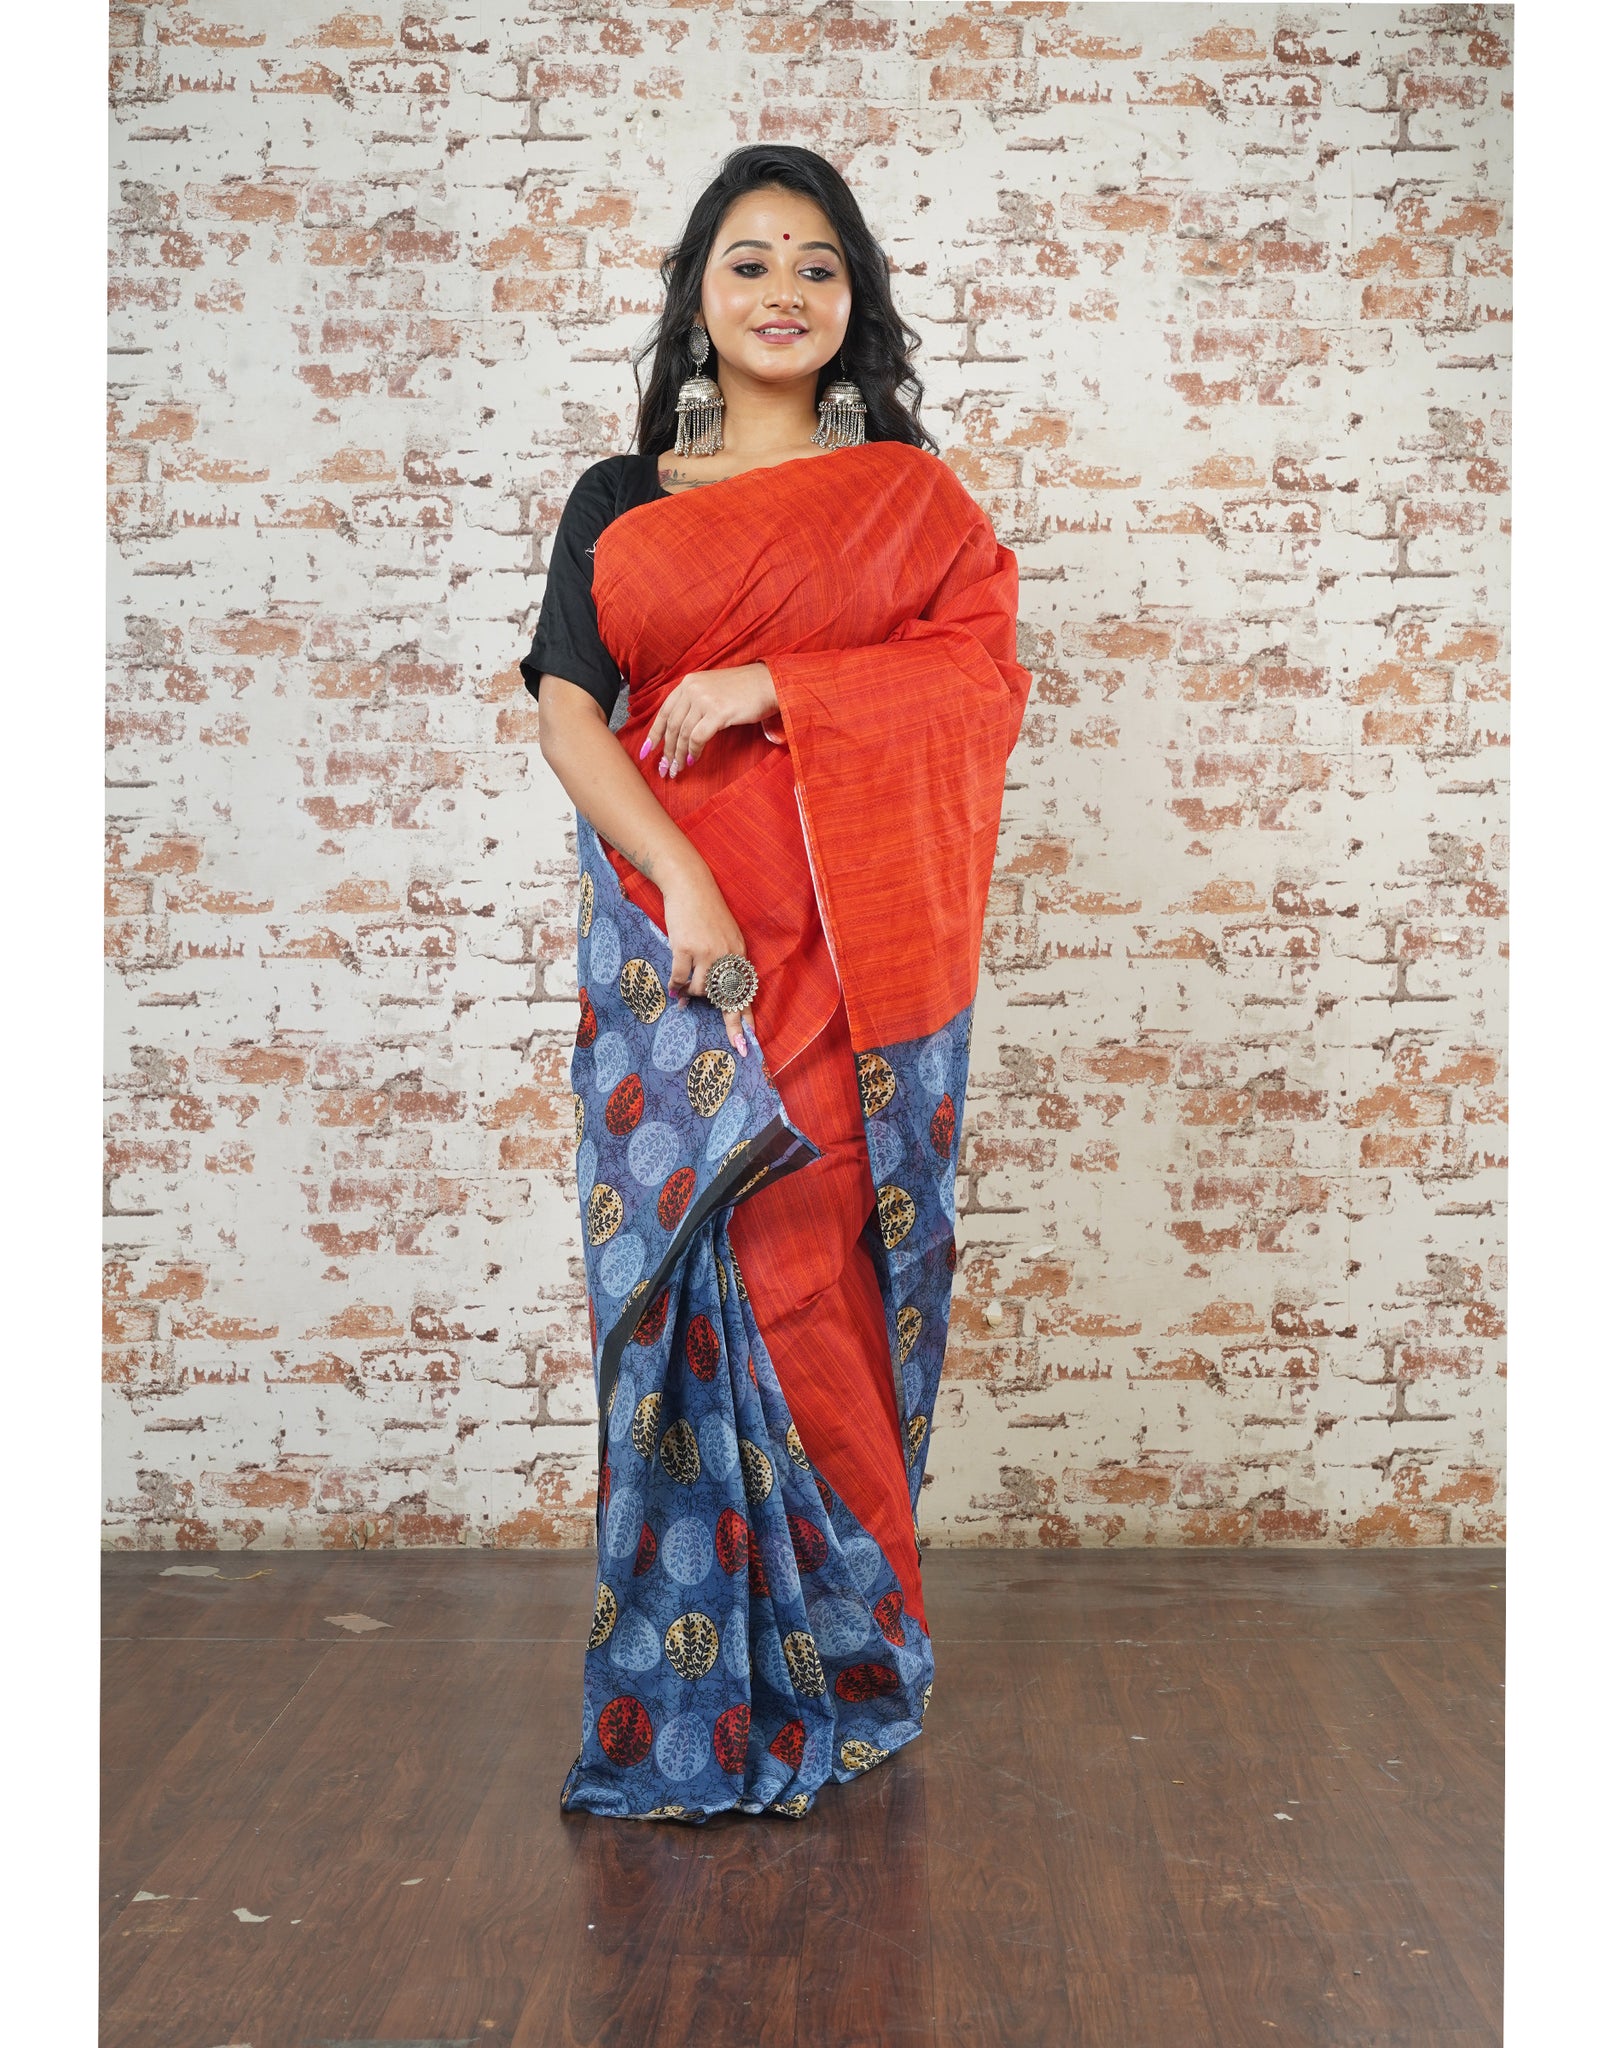 Red and Blue Saree with Circular Print at the Bottom